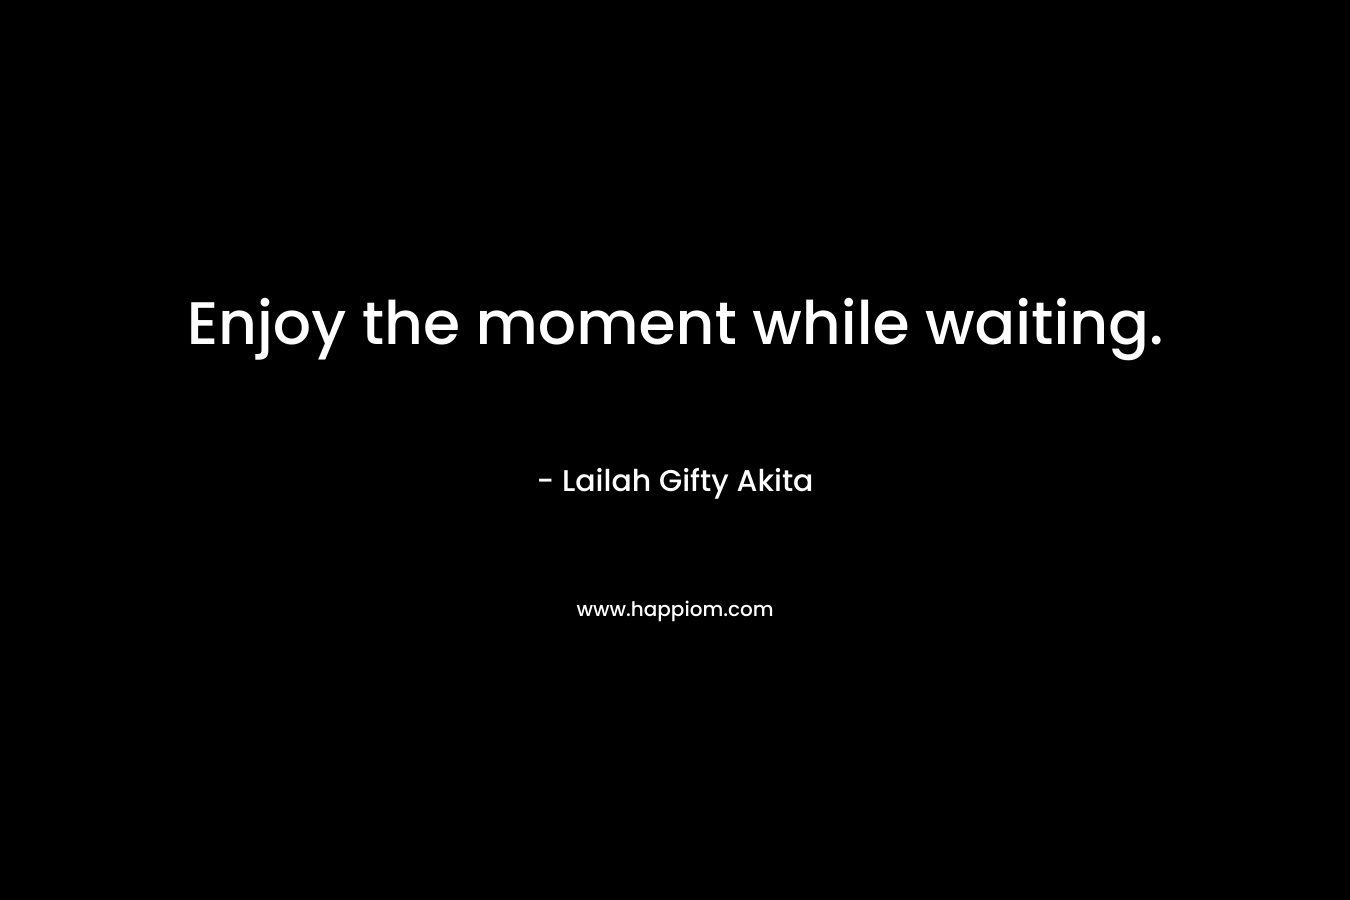 Enjoy the moment while waiting.